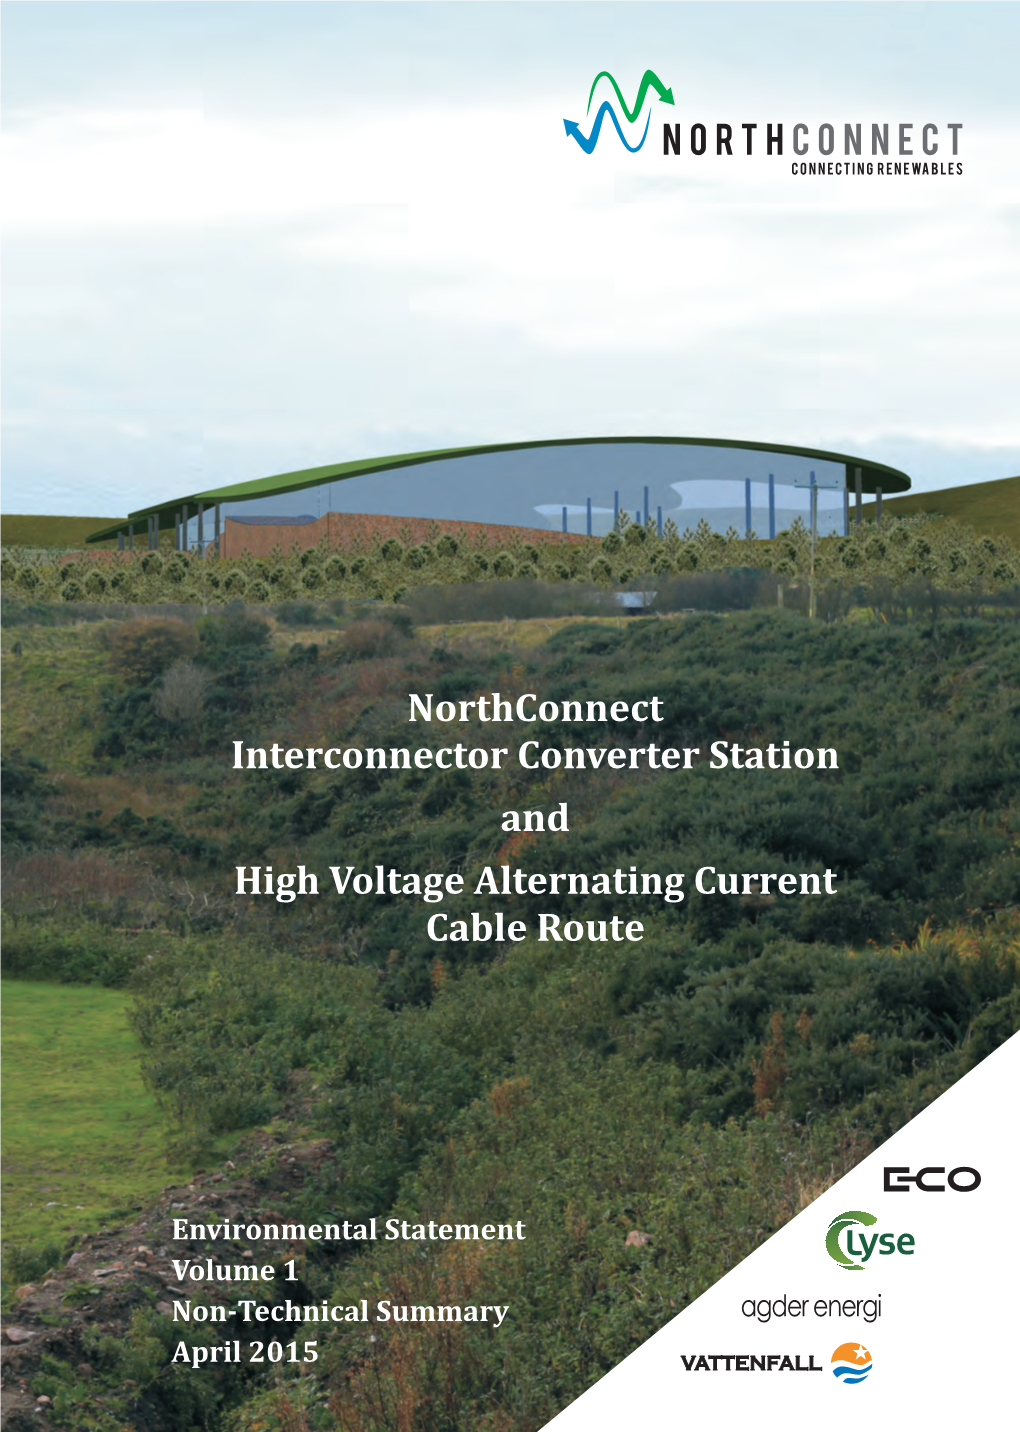 Northconnect Interconnector Converter Station and High Voltage Alternating Current Cable Route